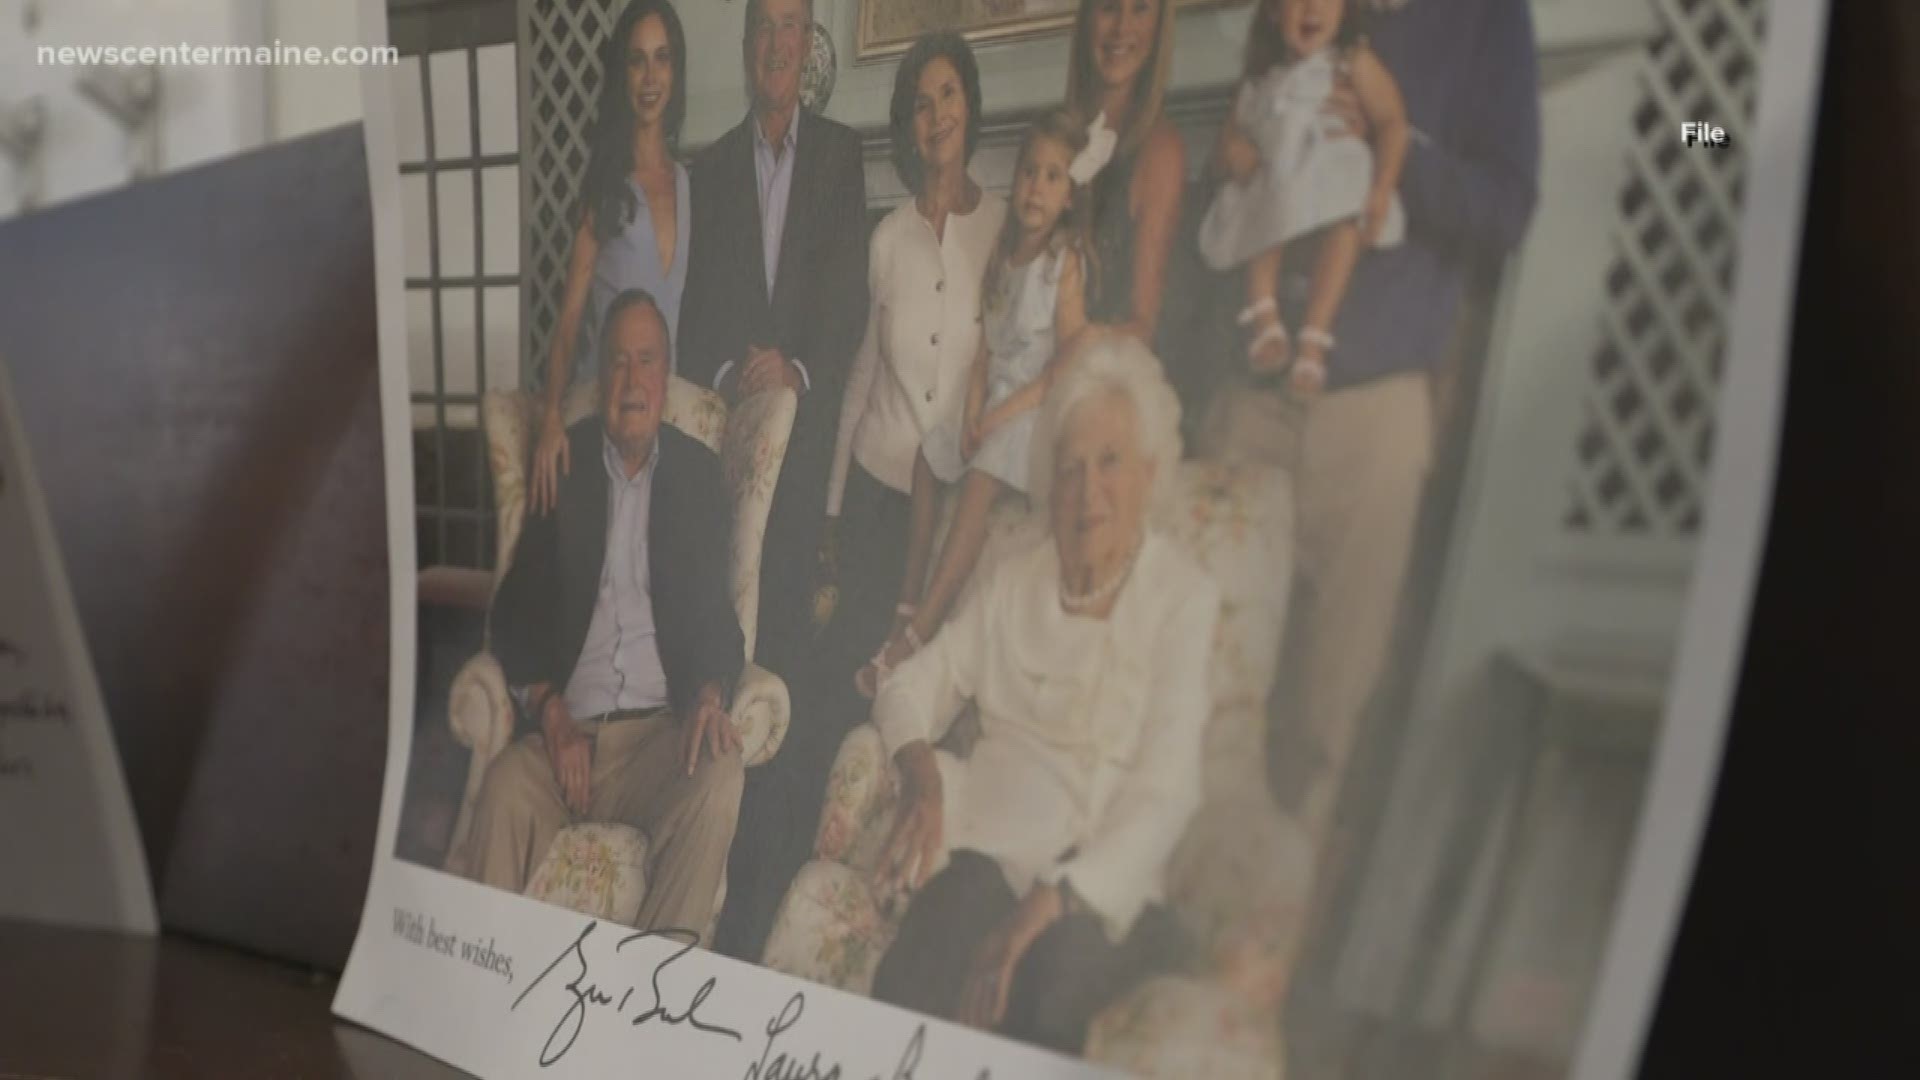 A woman from Kennebunkport remembers the great friendship she had with former President George H.W. Bush and first lady Barbara Bush.